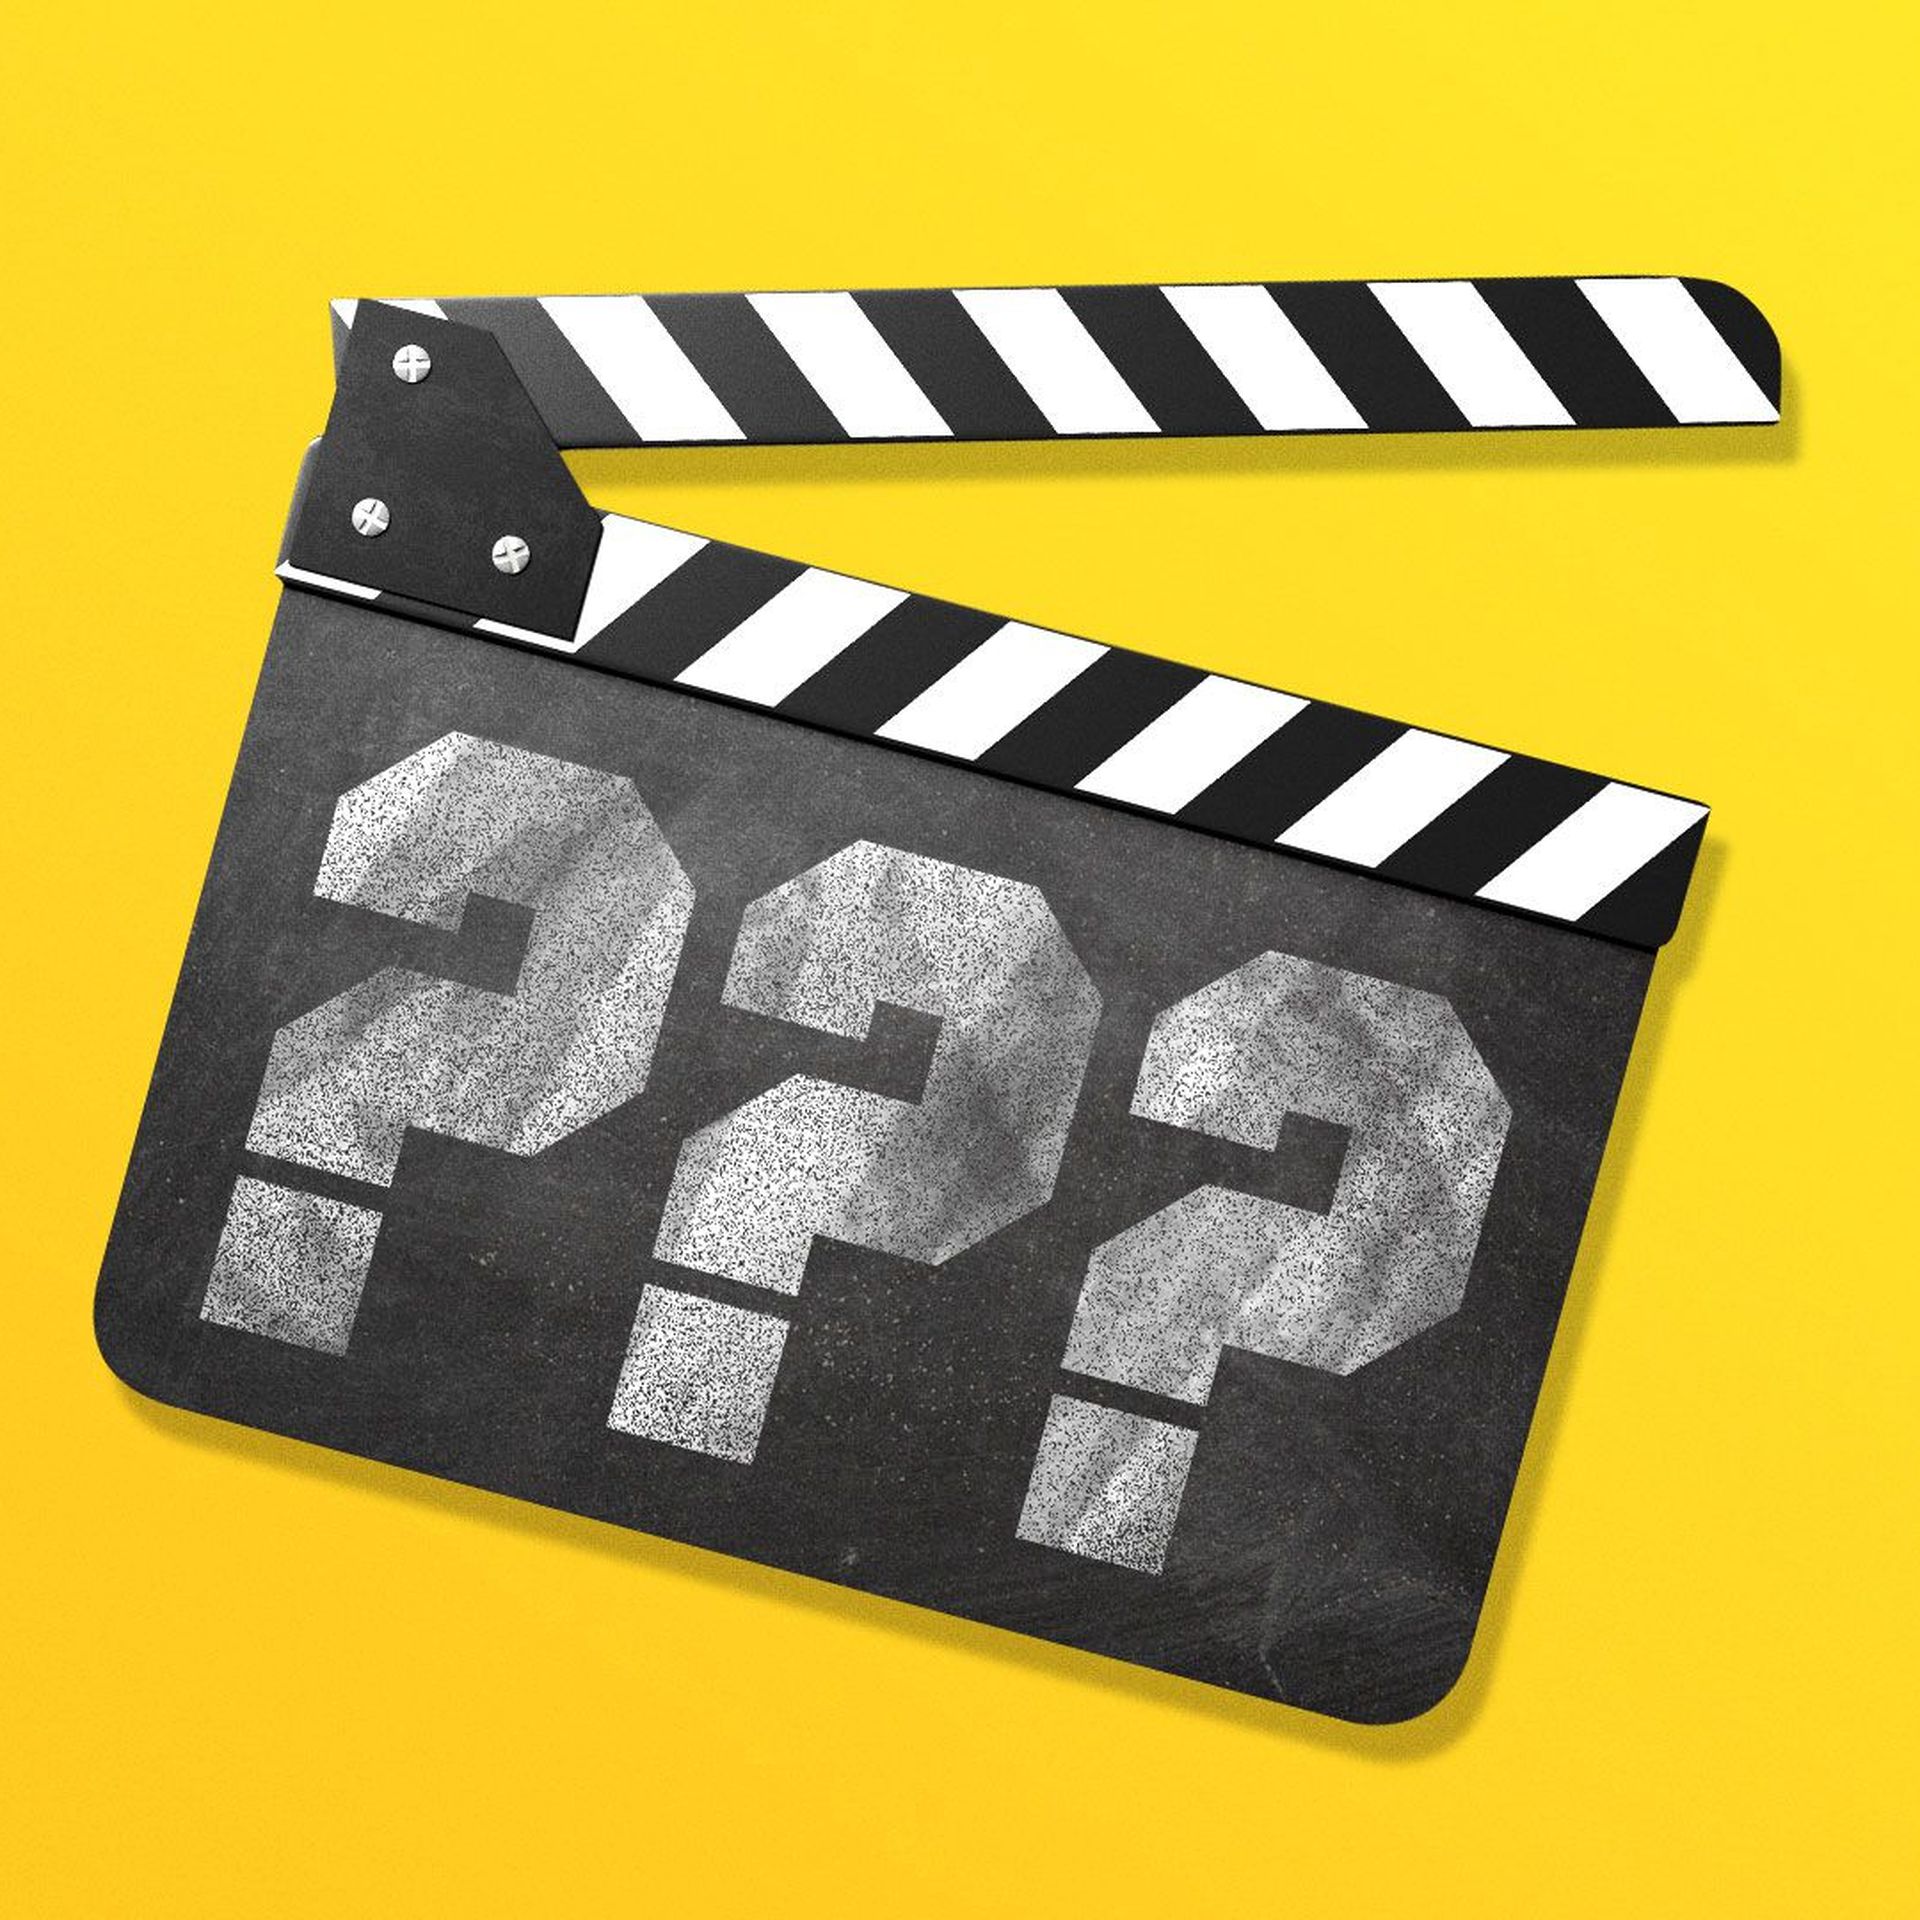 Illustration of film clapper with question marks